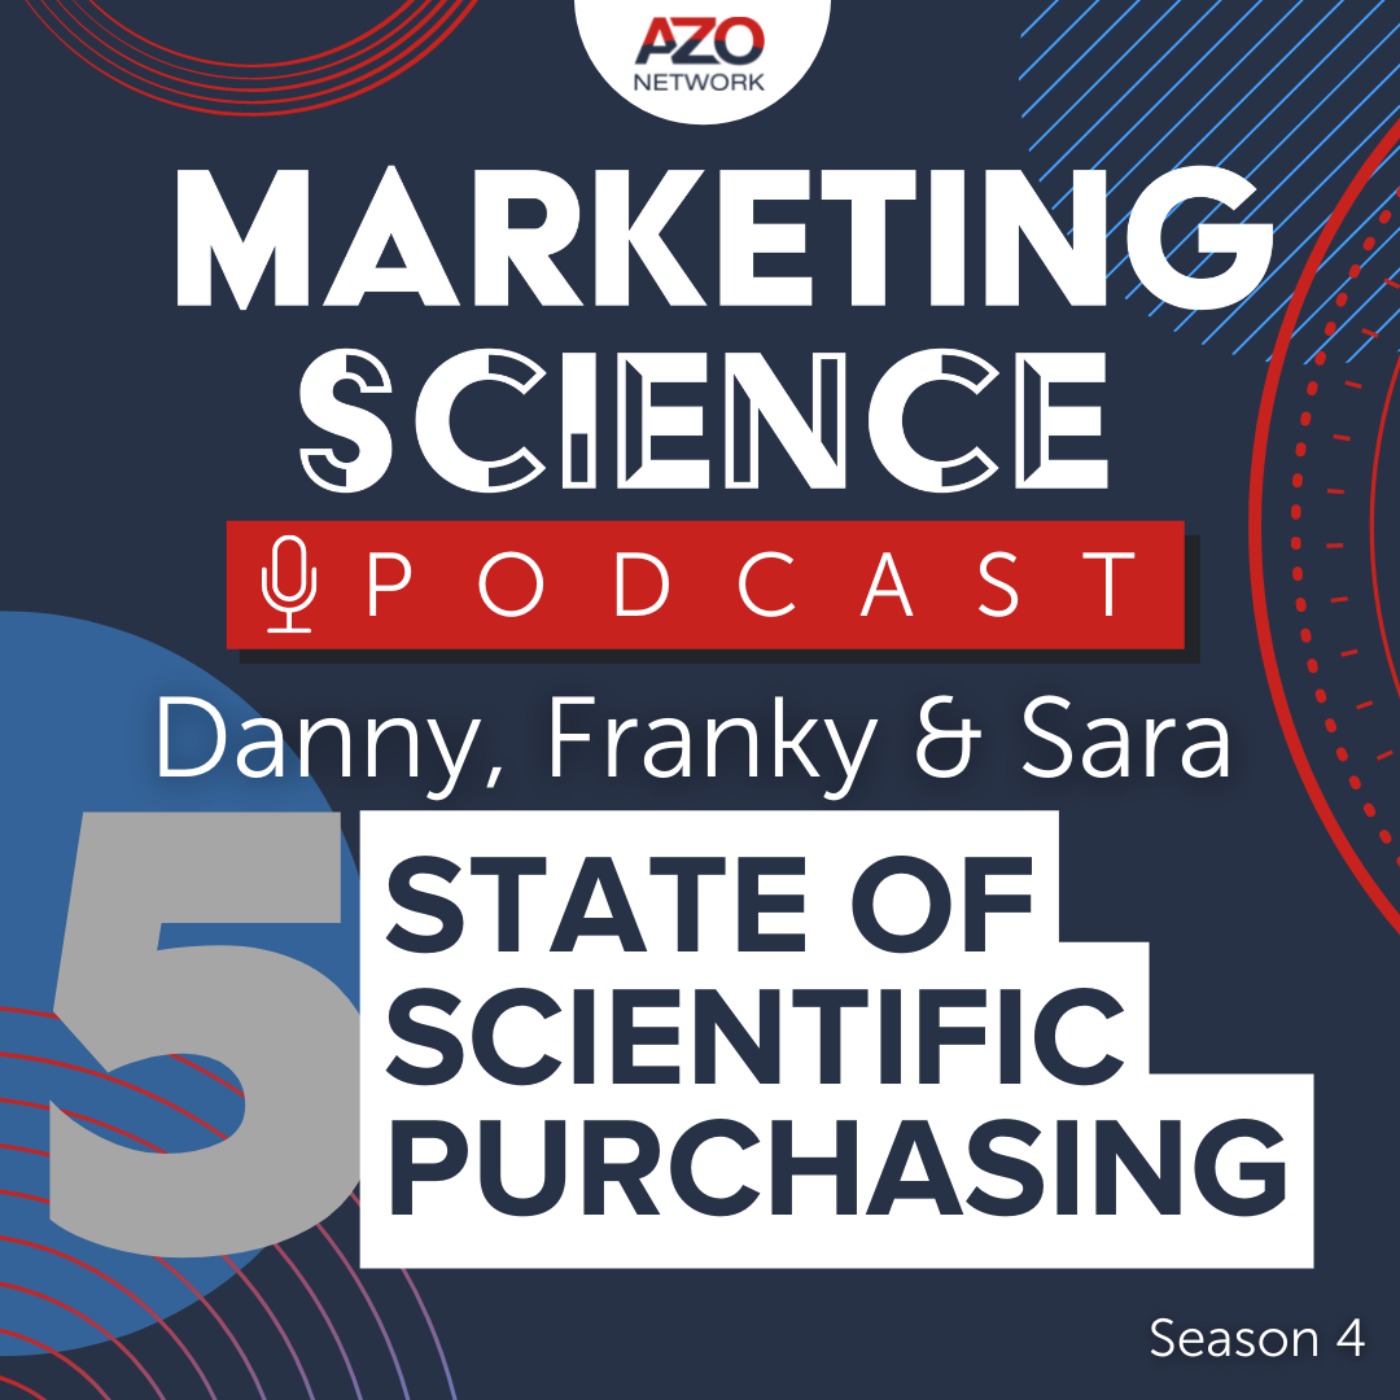 The State of Scientific Purchasing 2022